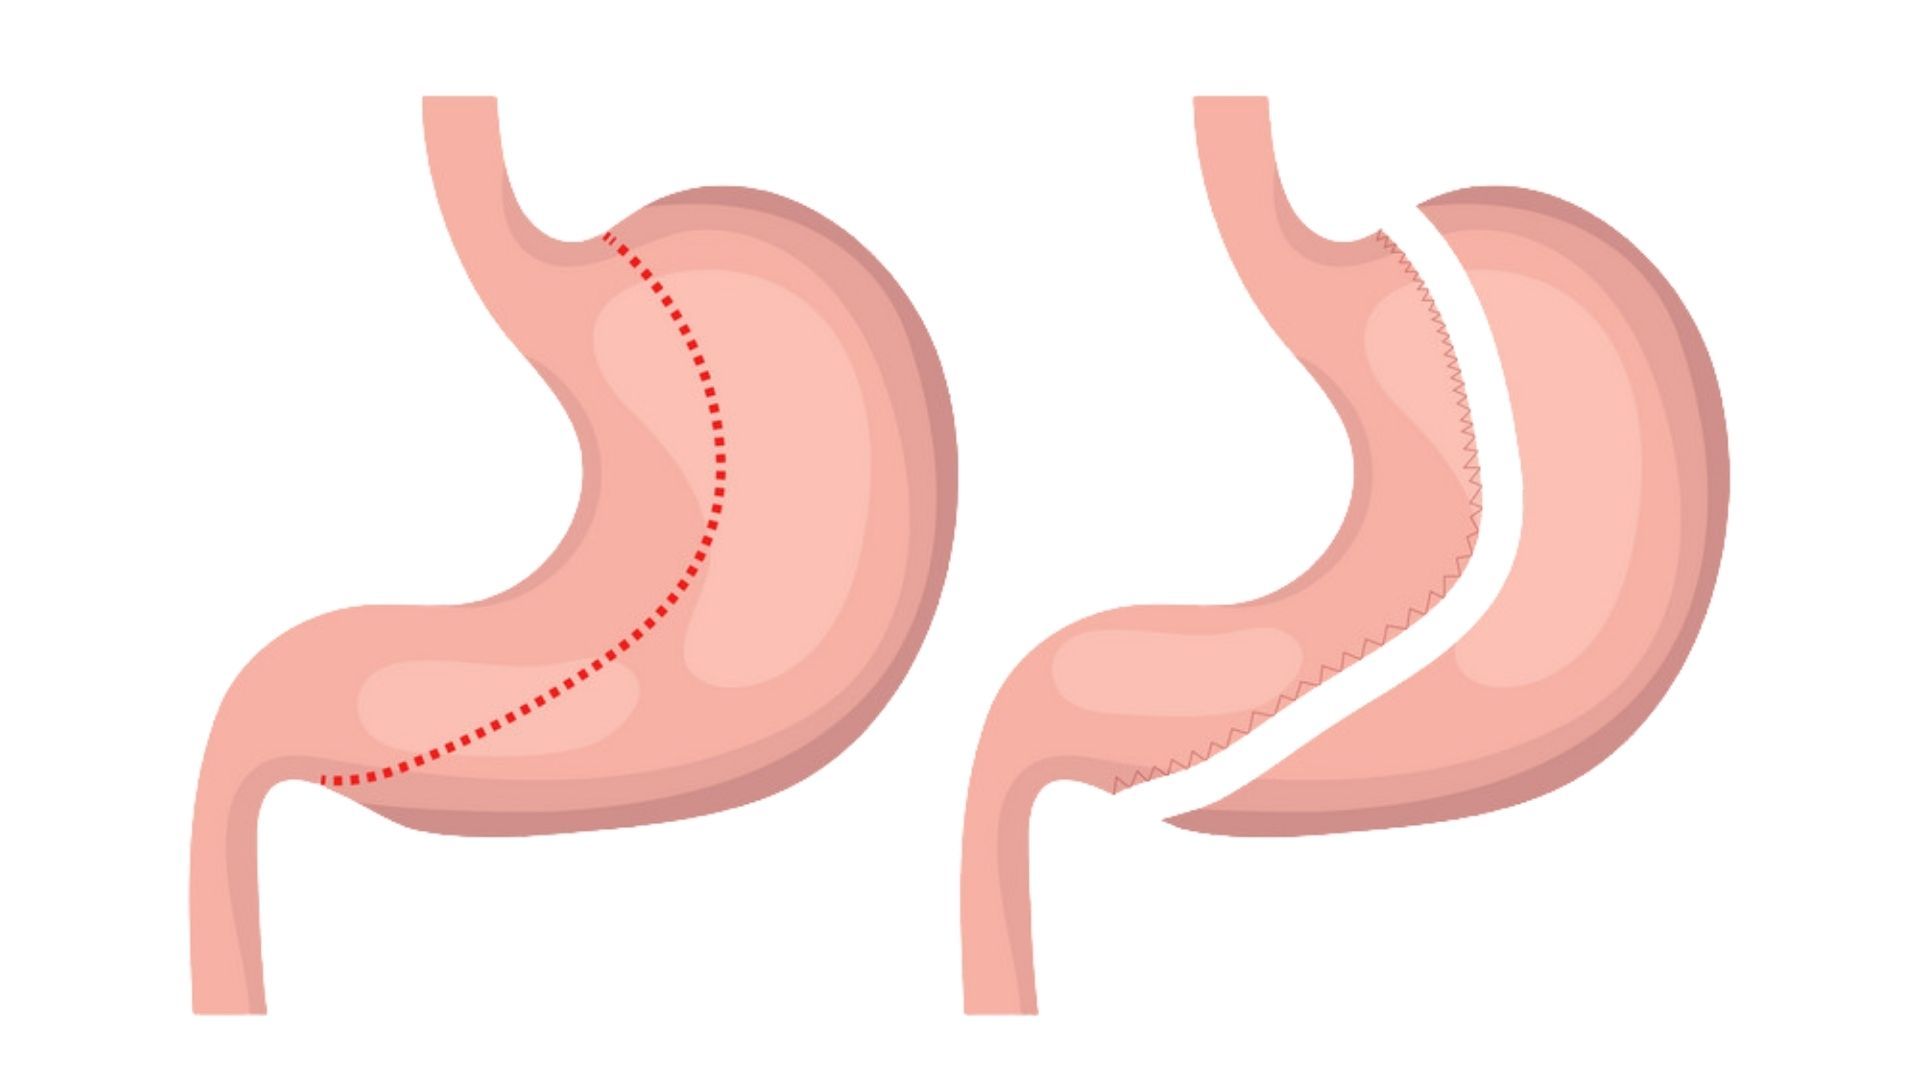 Gastric Sleeve: Understanding Risks and Complications